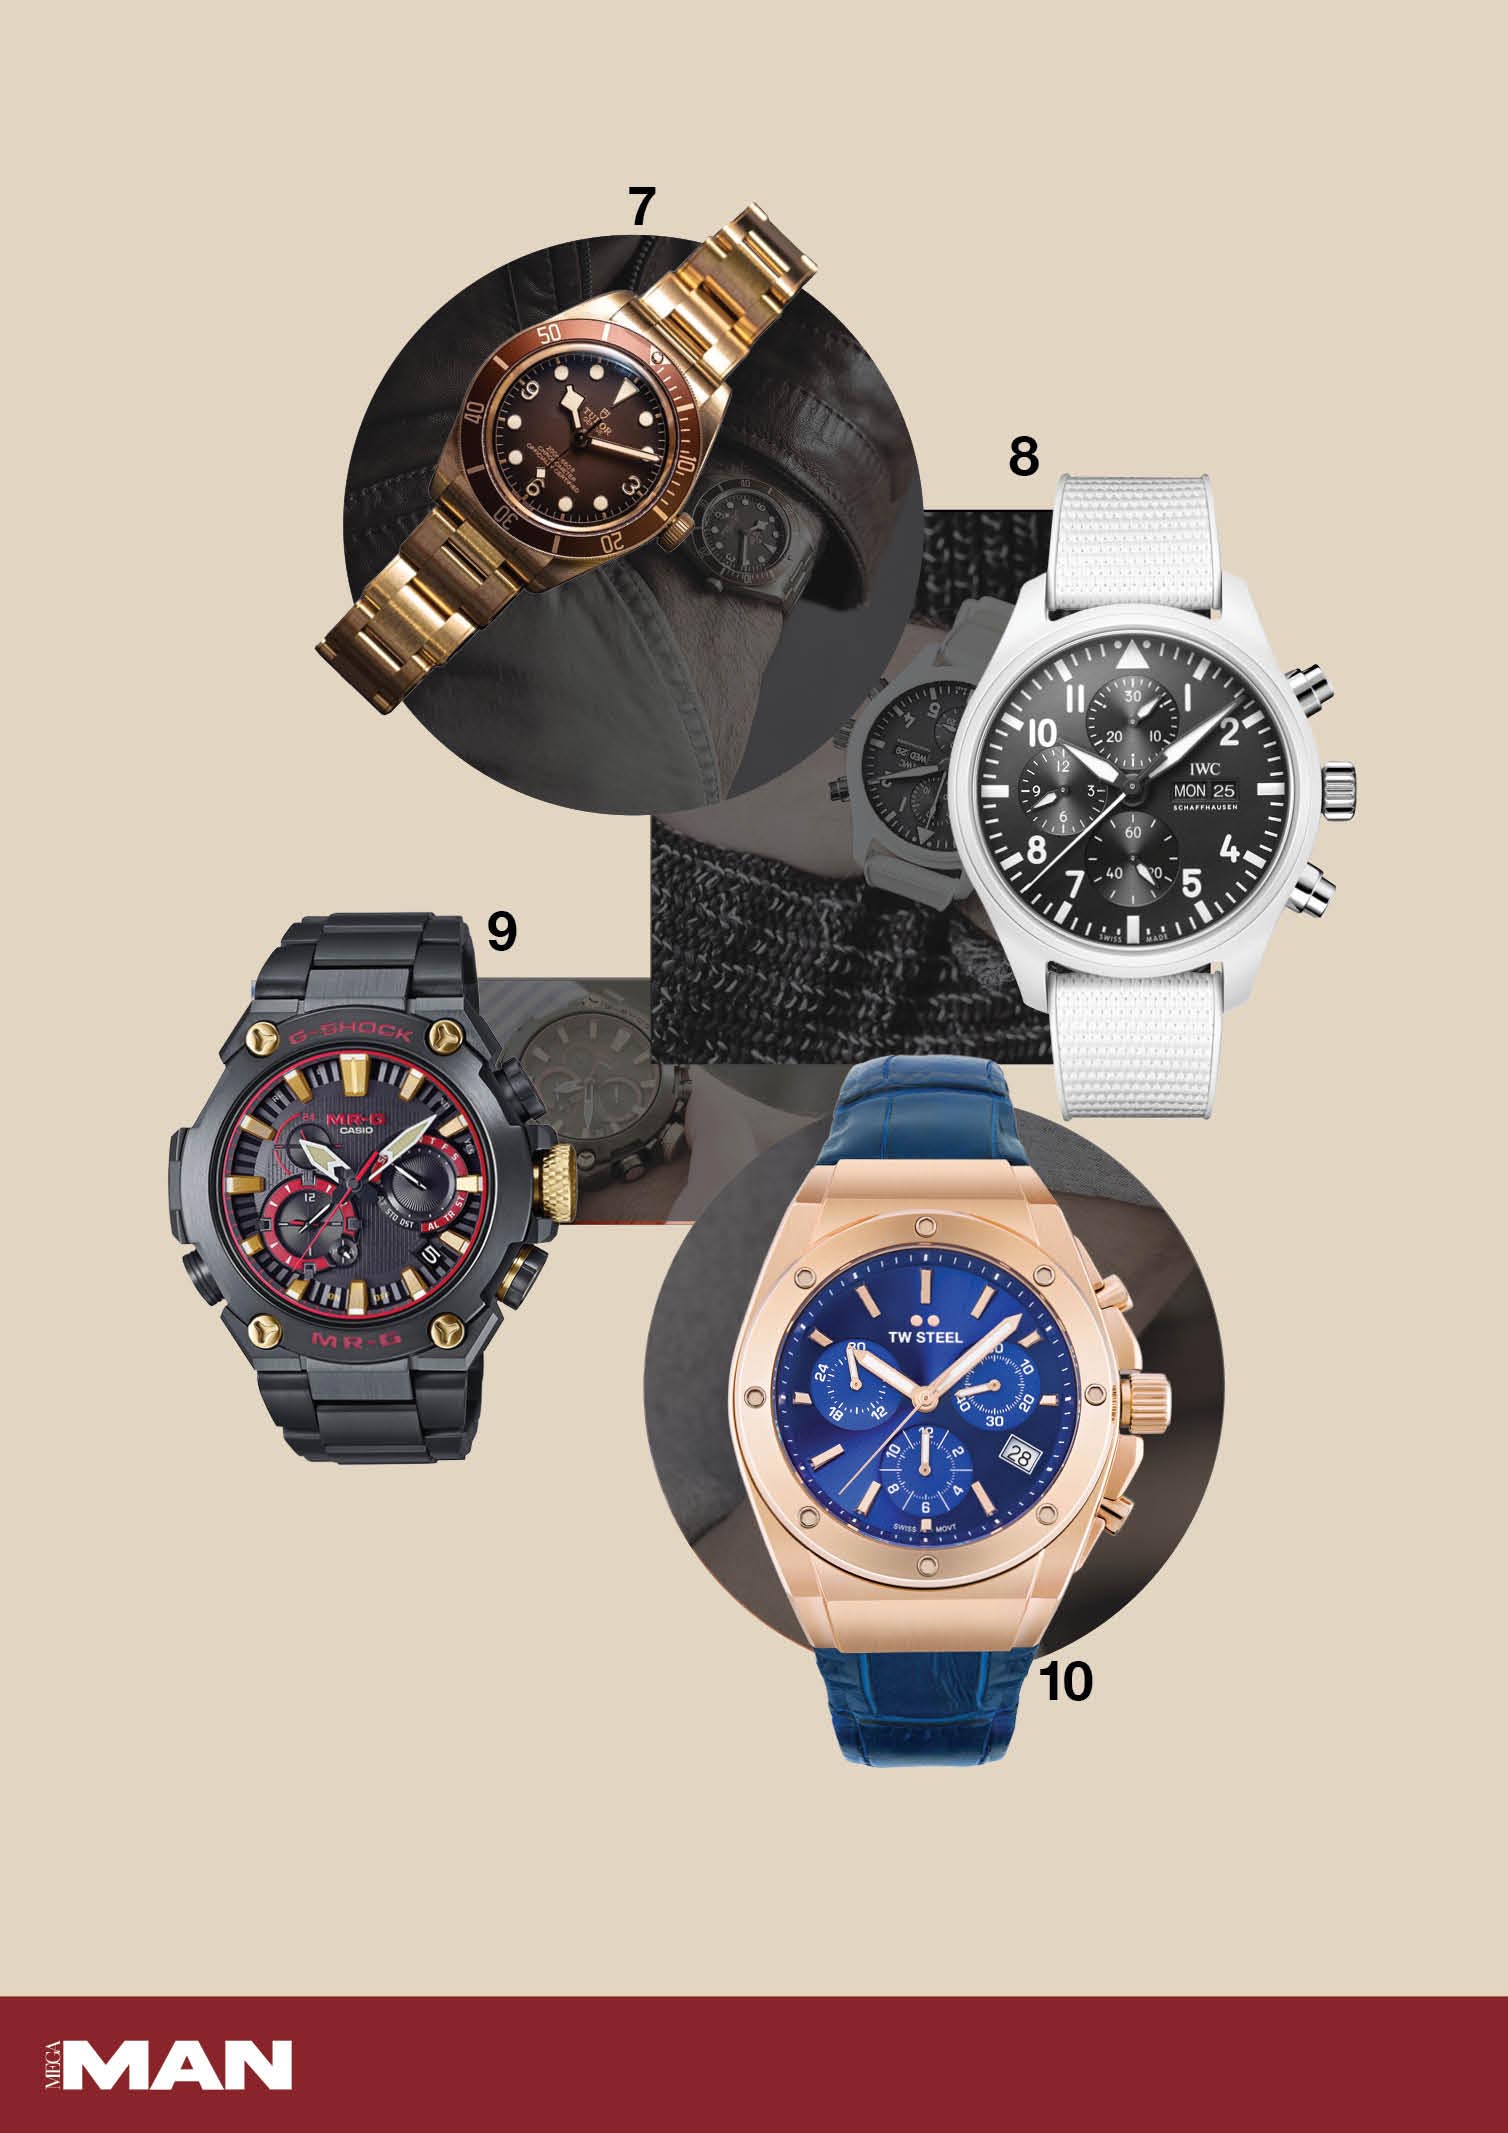 Tudor Black Bay Fifty-Eight Bronze, IWC Pilot's Watch Chronograph Top Gun Edition [Lake Tahoe], Casio G-Shock MR-G and TW Steel CEO Tech 4036 watch images